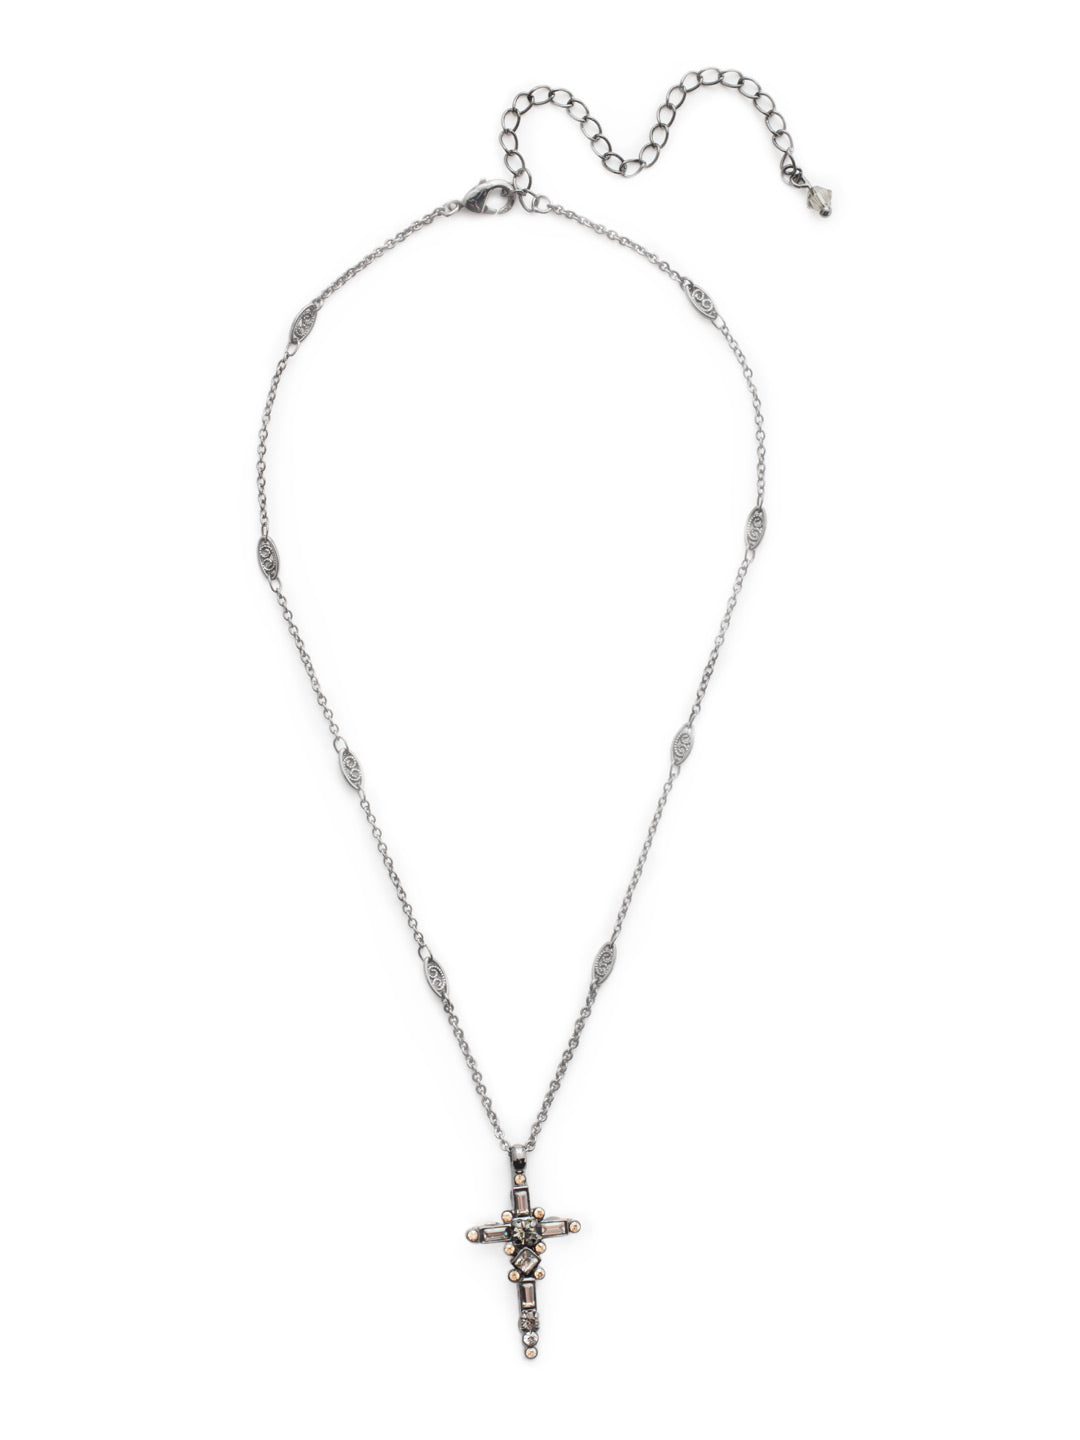 Dierdre Cross Pendant Necklace - NDQ54GMGNS - A truly divine pendant. This delicate cross necklace features multi-cut crystals in an antique inspired setting. This crystal cross necklace offers movement on the chain for ease of wear. From Sorrelli's Golden Shadow collection in our Gun Metal finish.